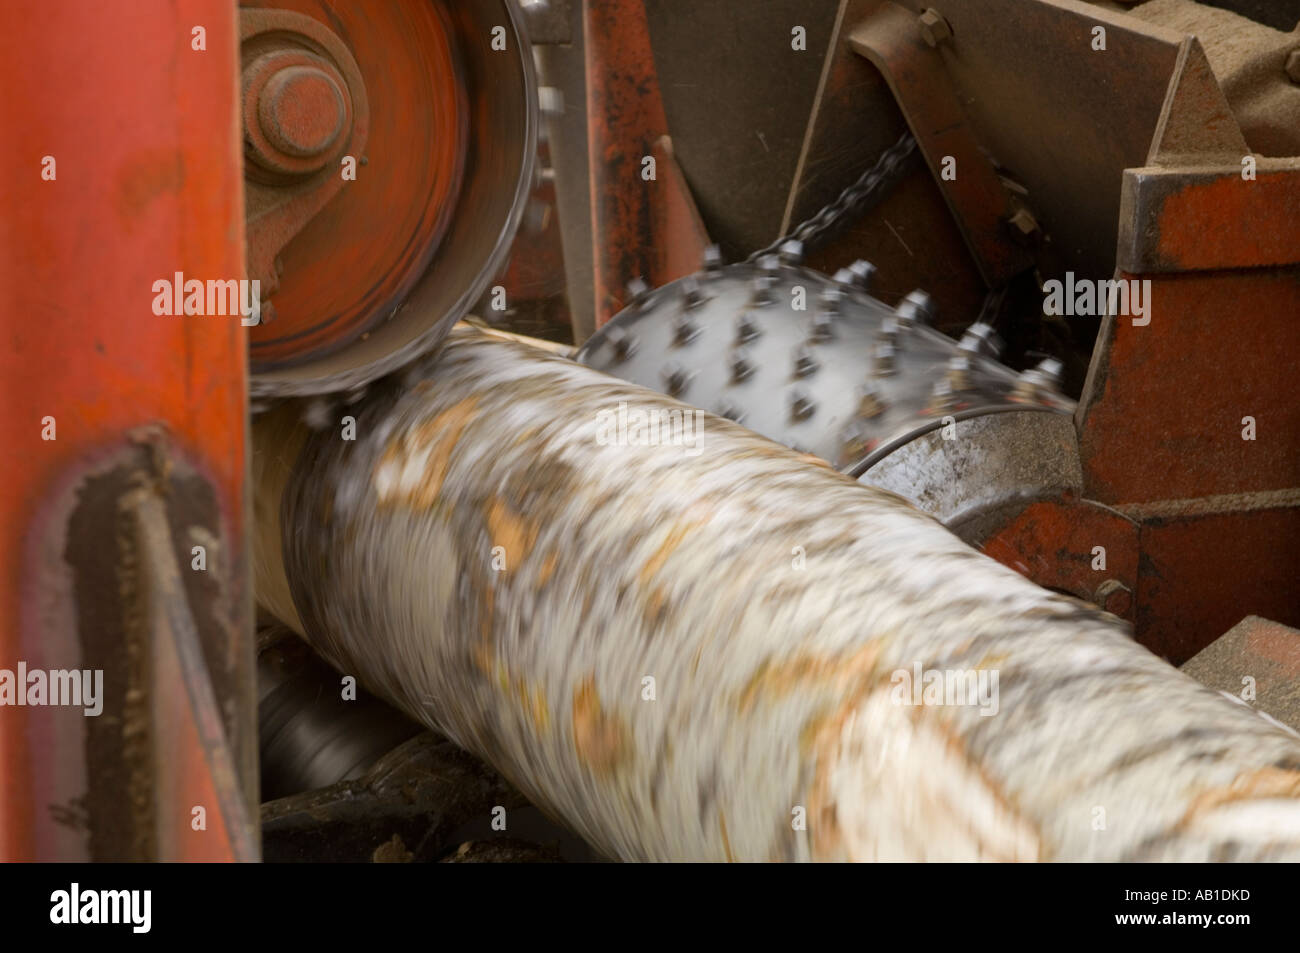 A LOG SPINS AS IT MOVES THROUGH THE DEBARKER Stock Photo